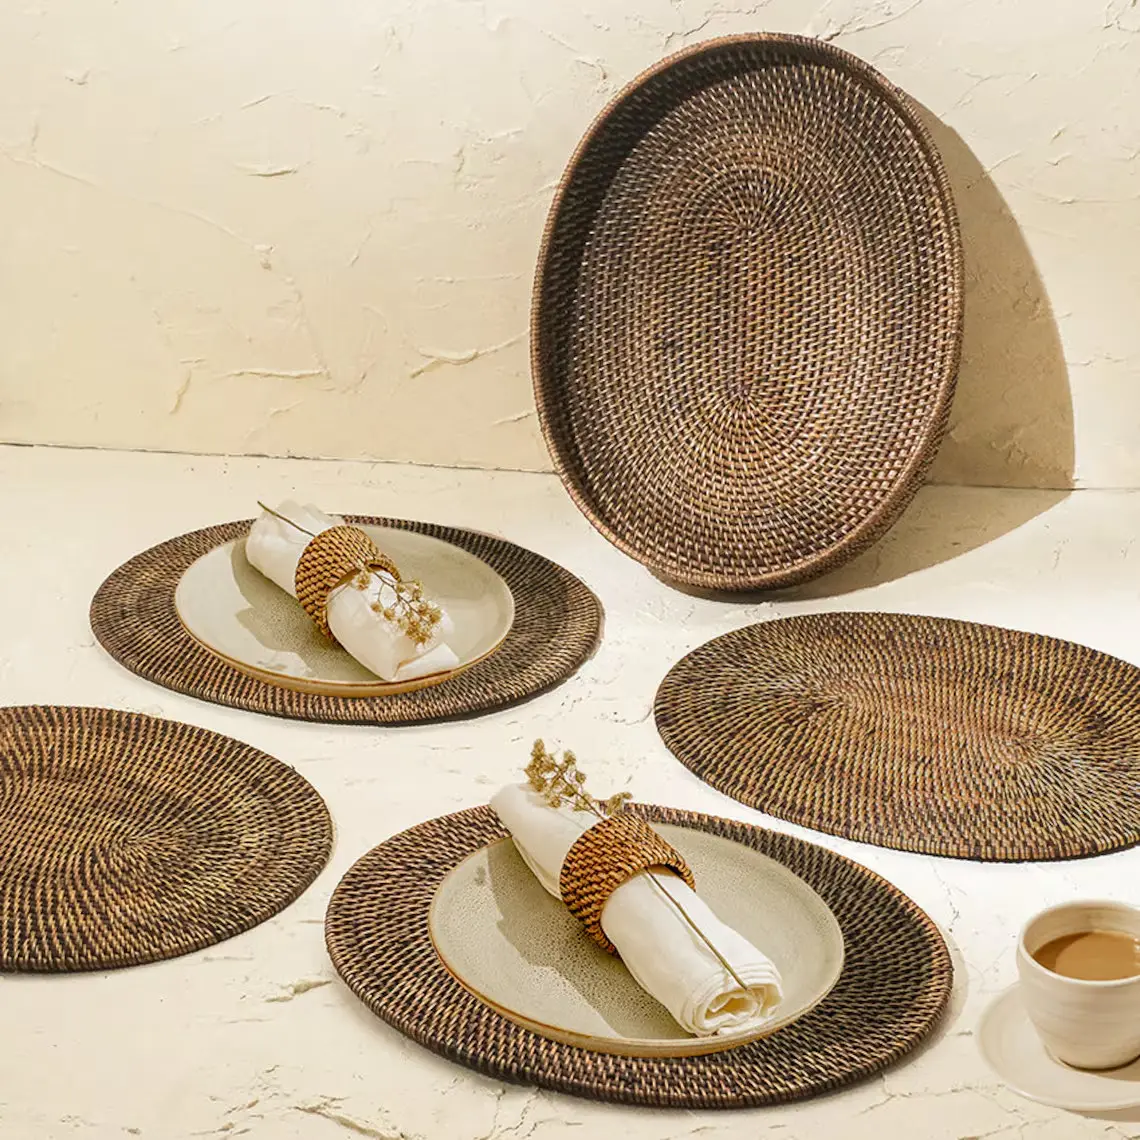 High quality natural rattan oval placemat set of 4 in brown color for table decoration in wedding party handmade from Vietnam